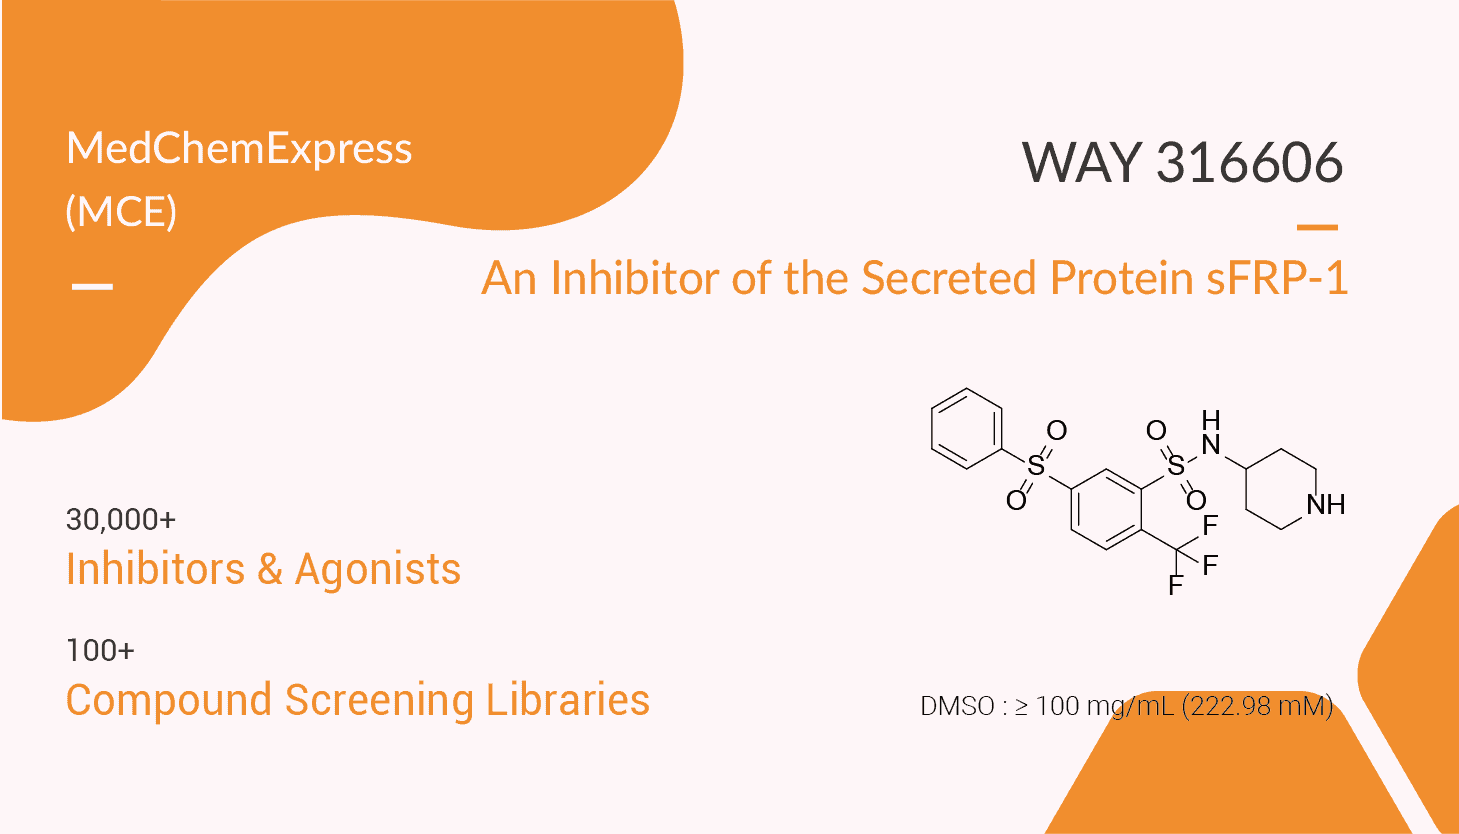 WAY 316606 is an Inhibitor of the Secreted Protein sFRP-1